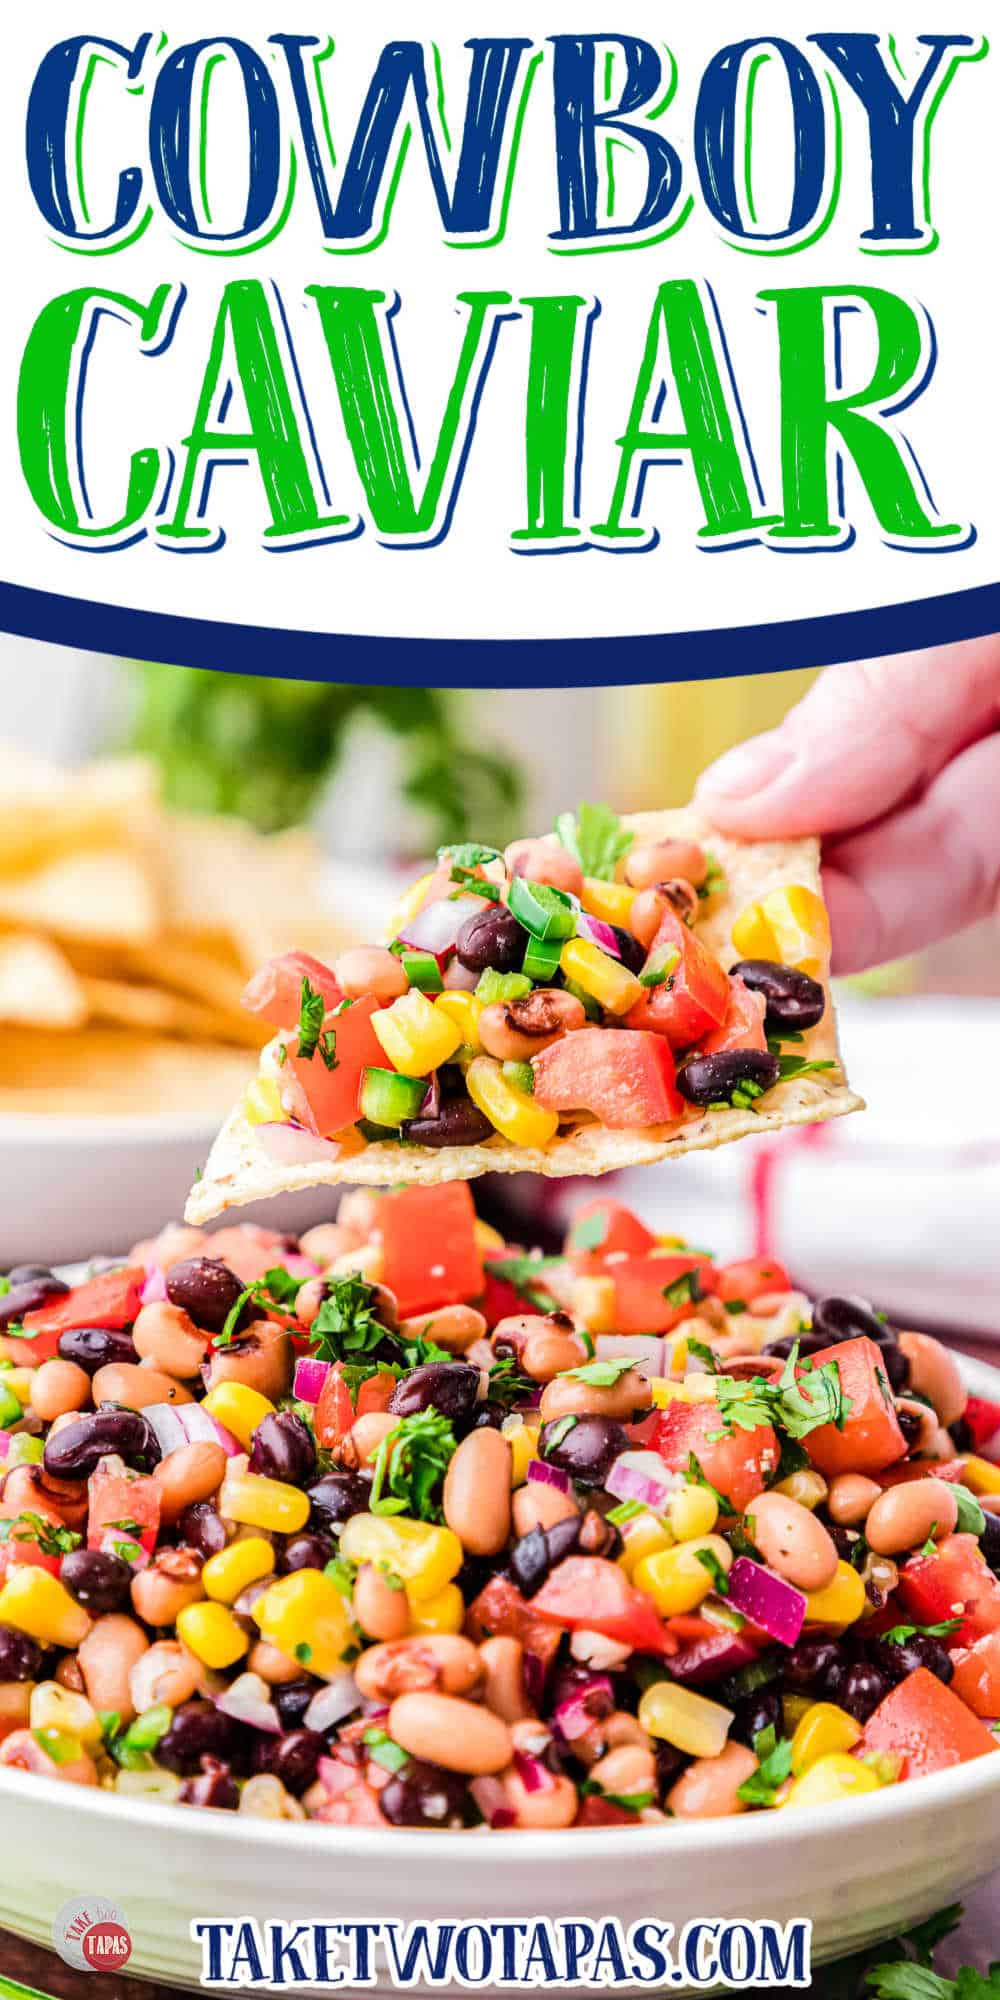 Pinterest Pin with picture: Close up of a white bowl filled with cowboy caviar salad with a chip being held in mid-air filled with the caviar dip. The text box at the top says "Cowboy Caviar" in blue and green writing.